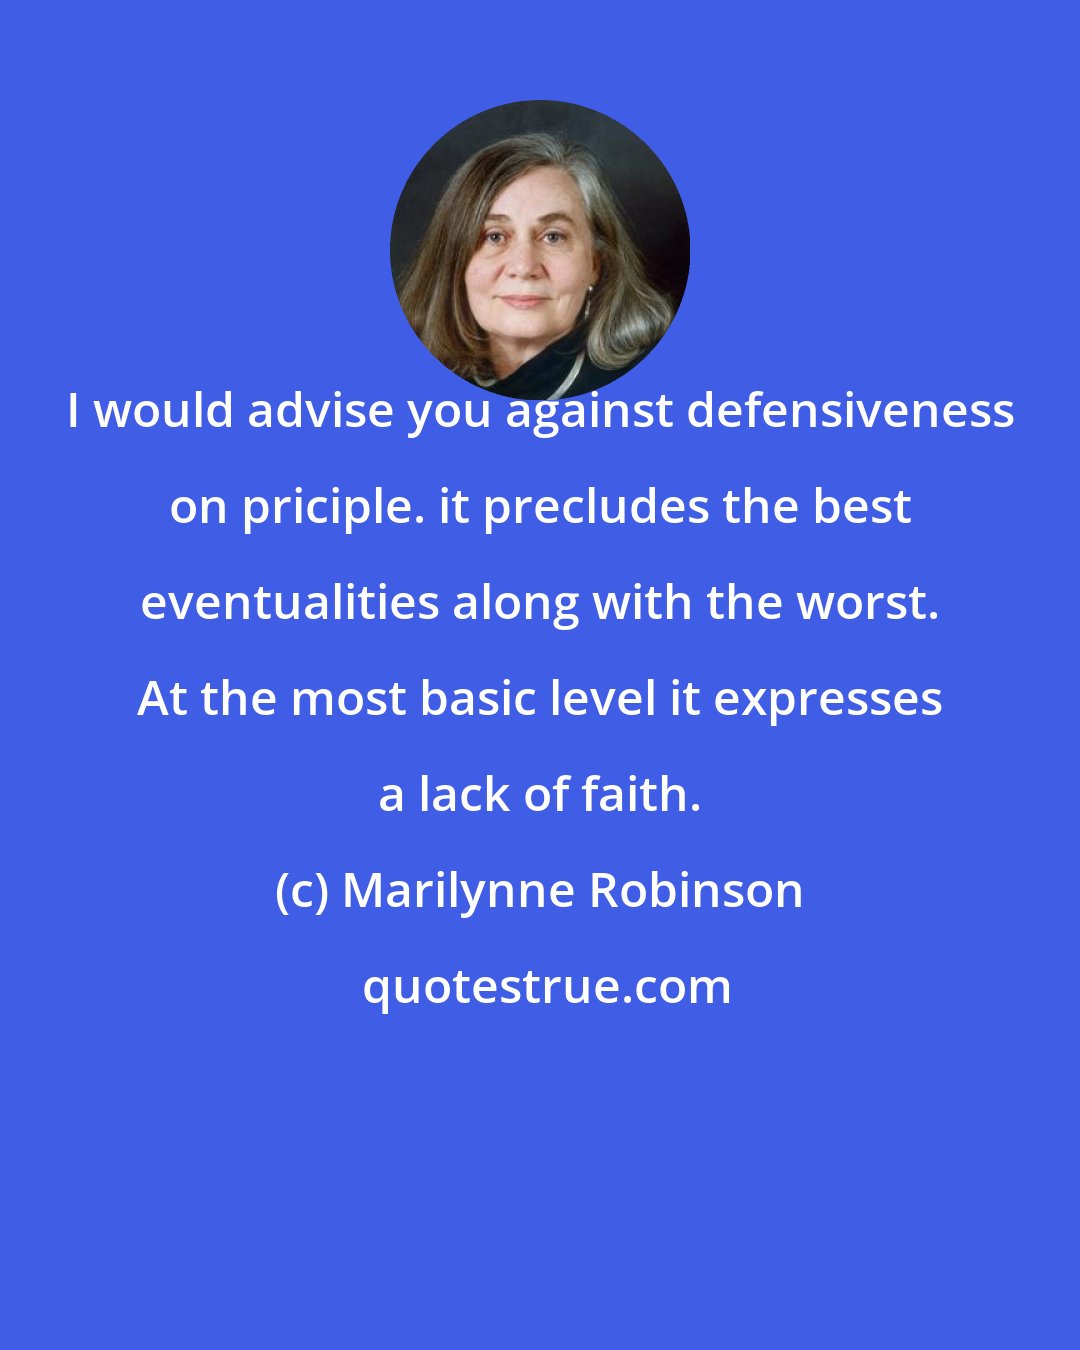 Marilynne Robinson: I would advise you against defensiveness on priciple. it precludes the best eventualities along with the worst. At the most basic level it expresses a lack of faith.